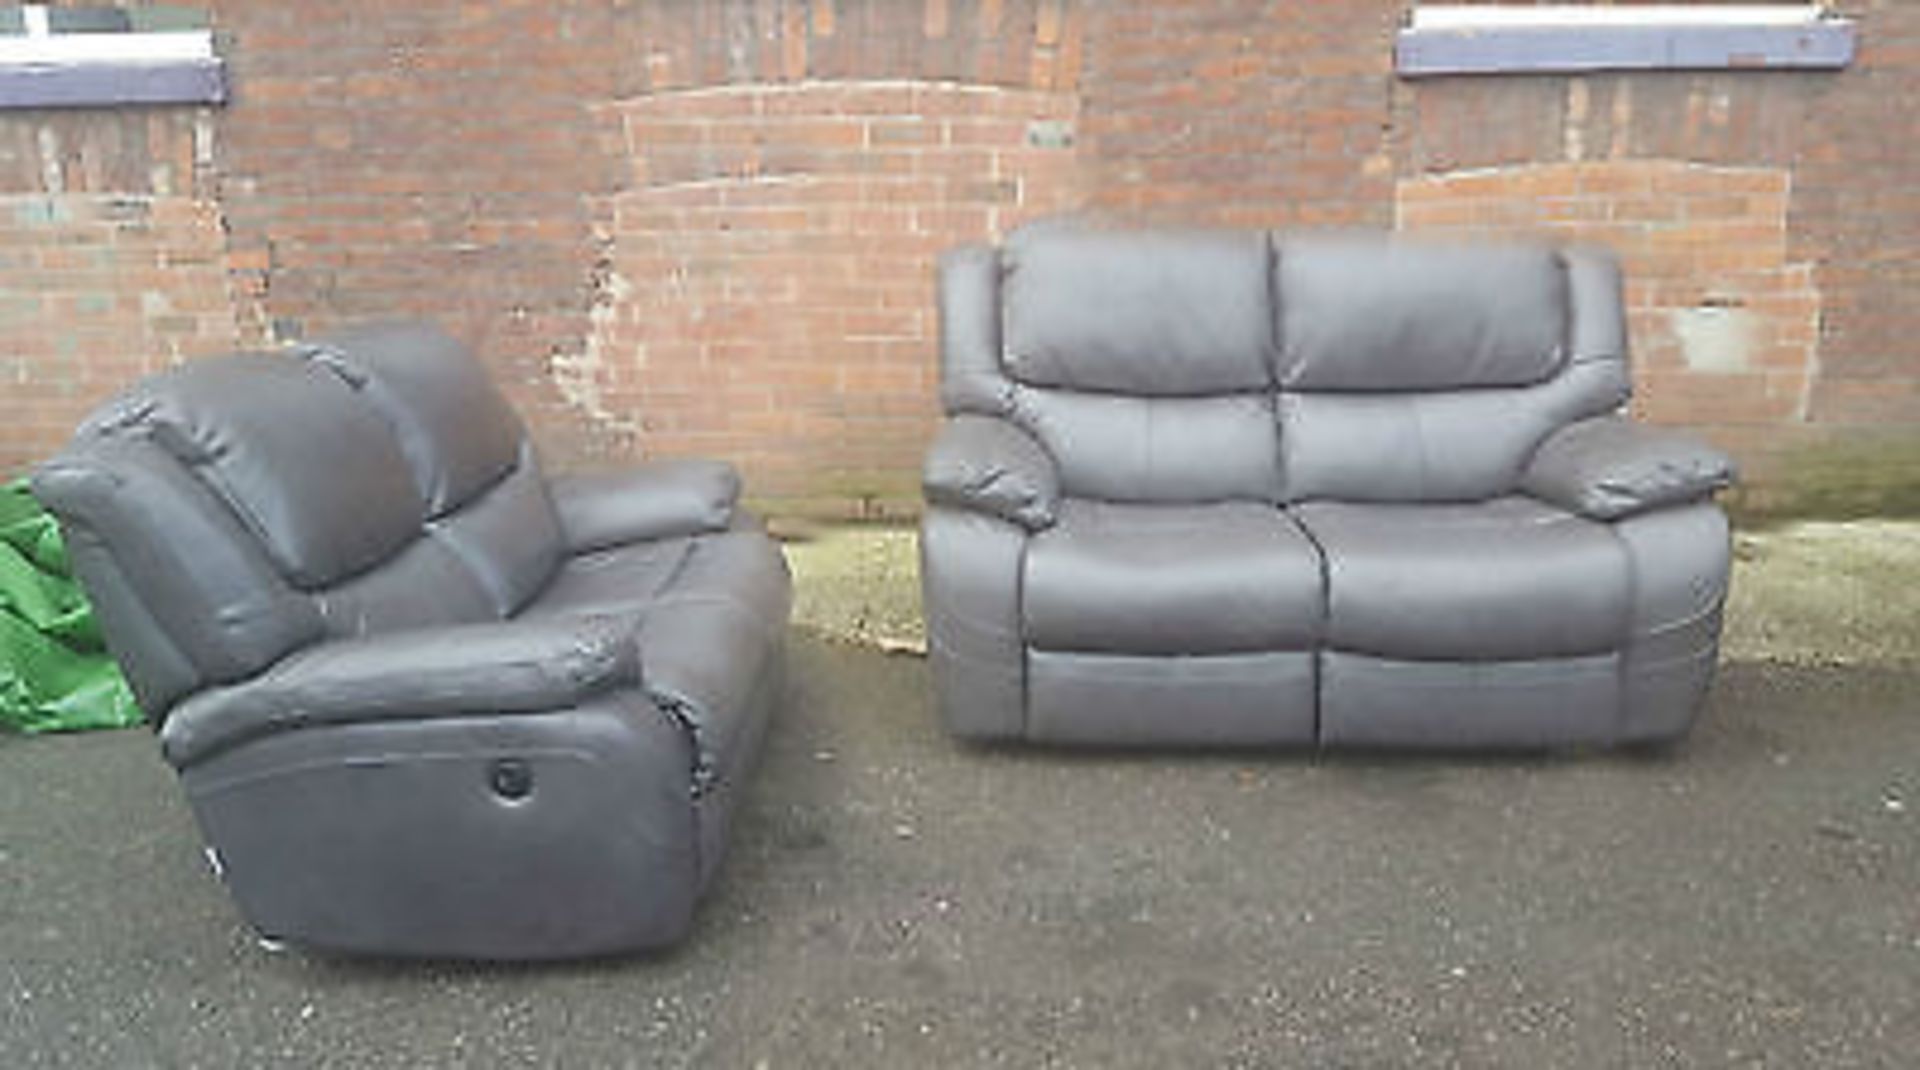 Supreme Valance graphite grey leather 2 seater plus 2 seater reclining sofas